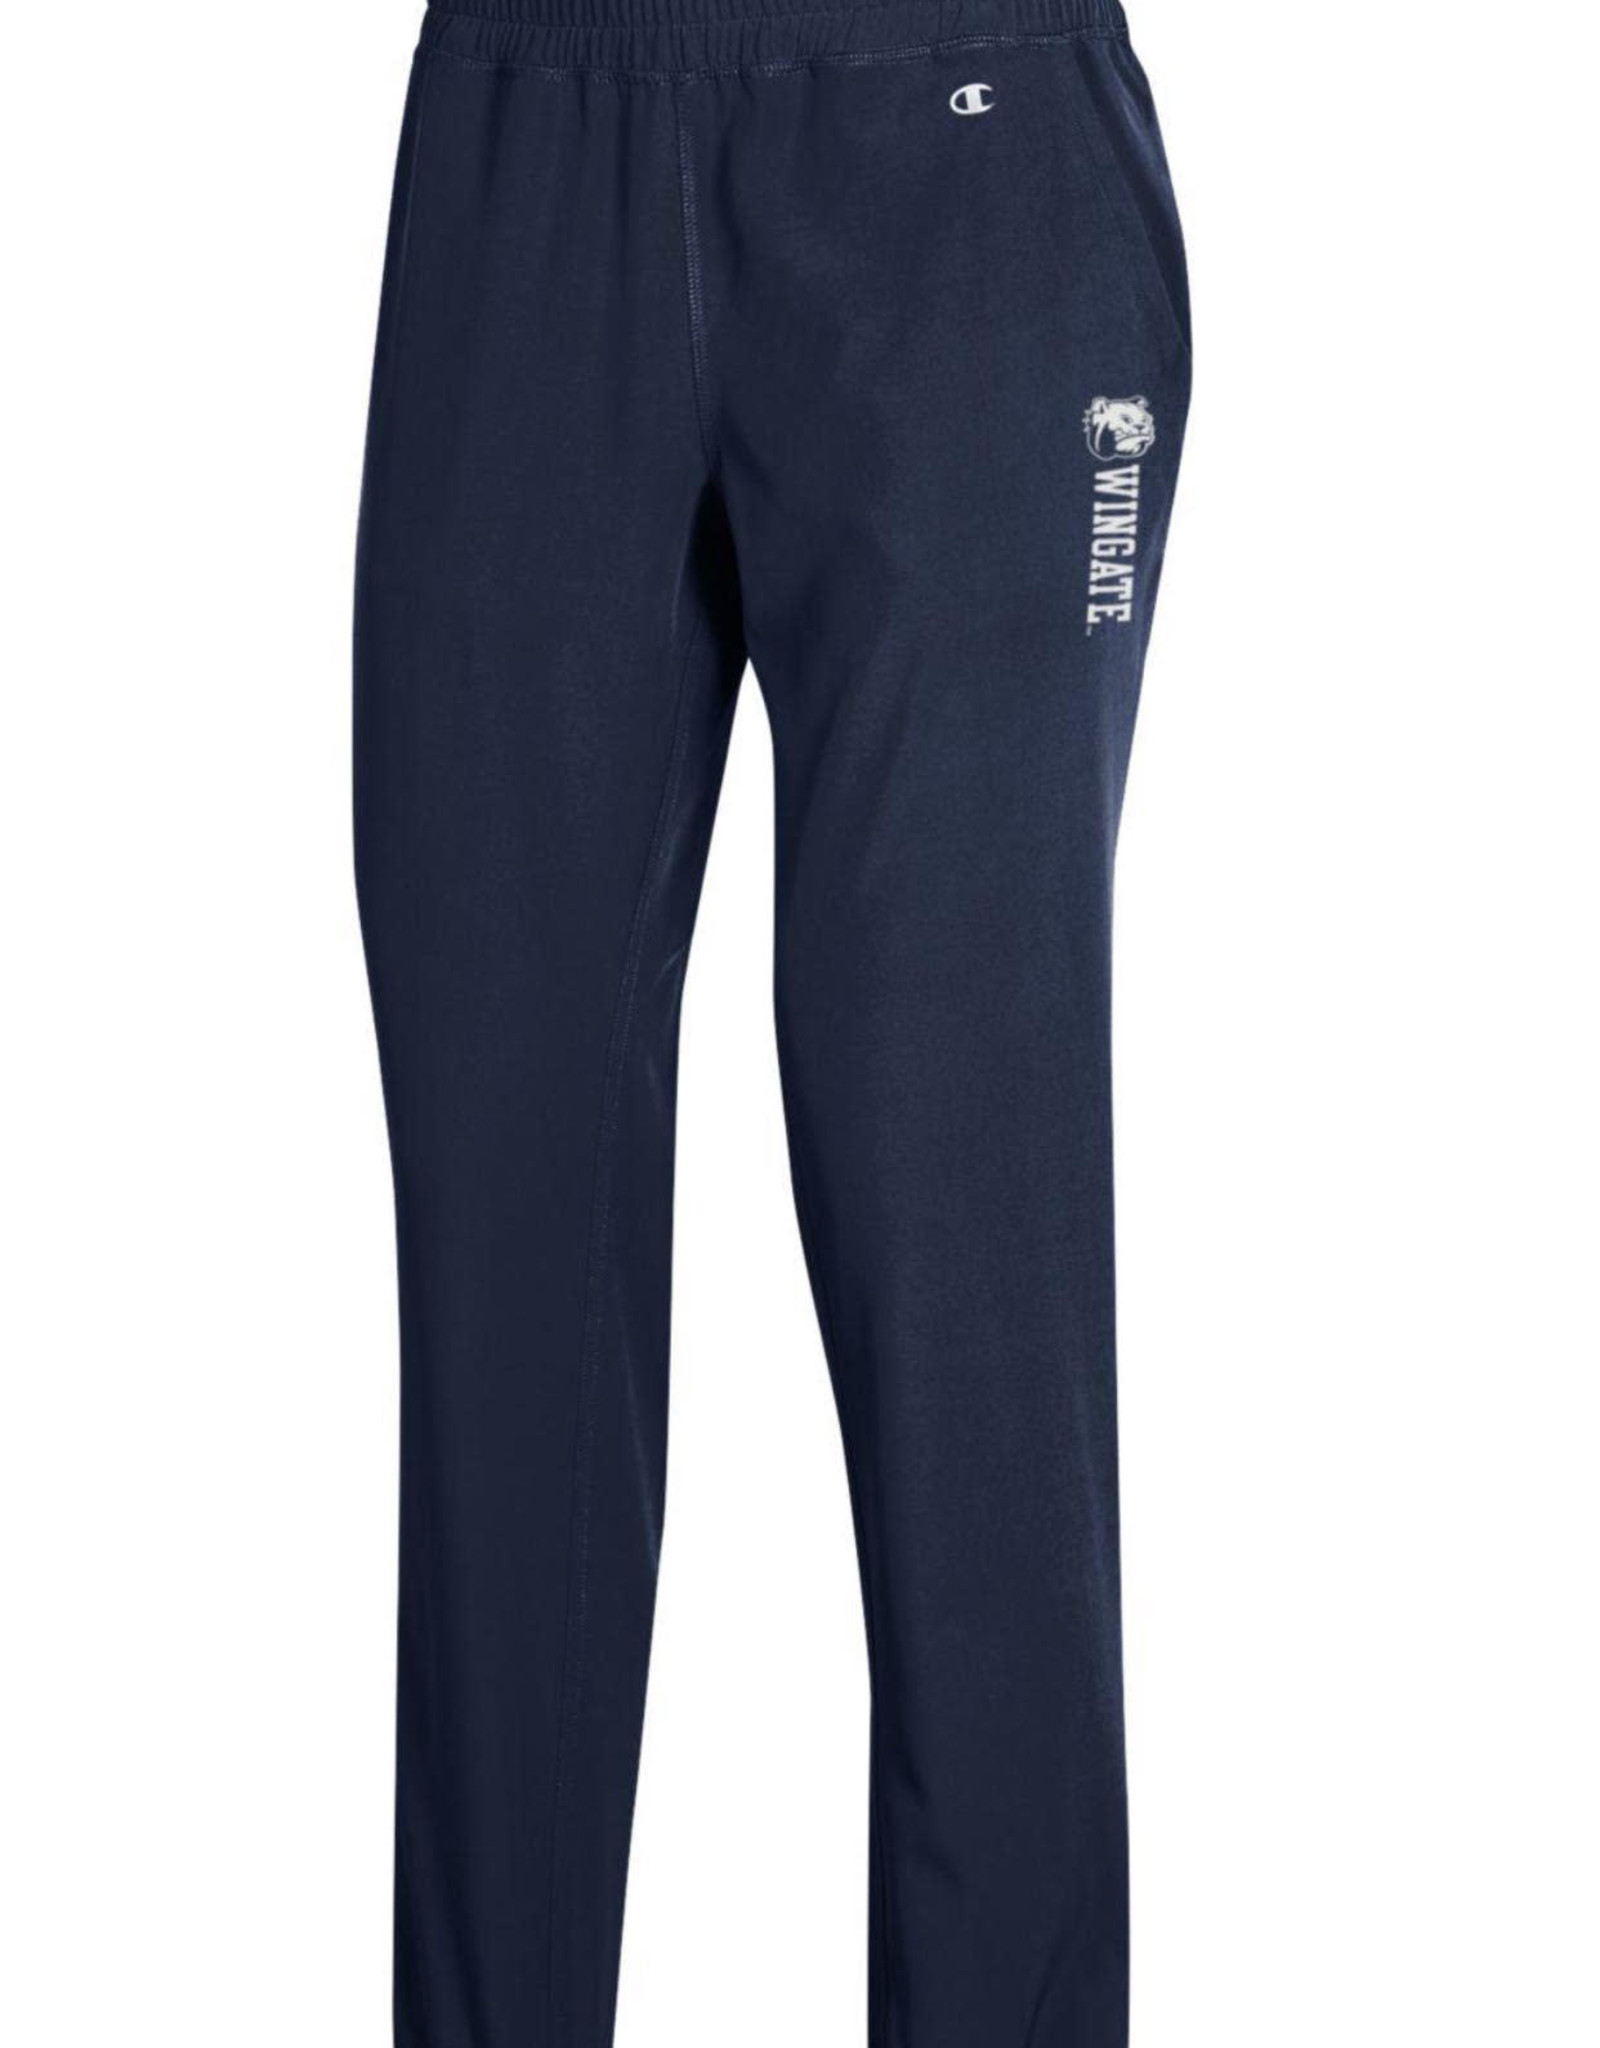 Ladies Navy Woven Stretch Pants 